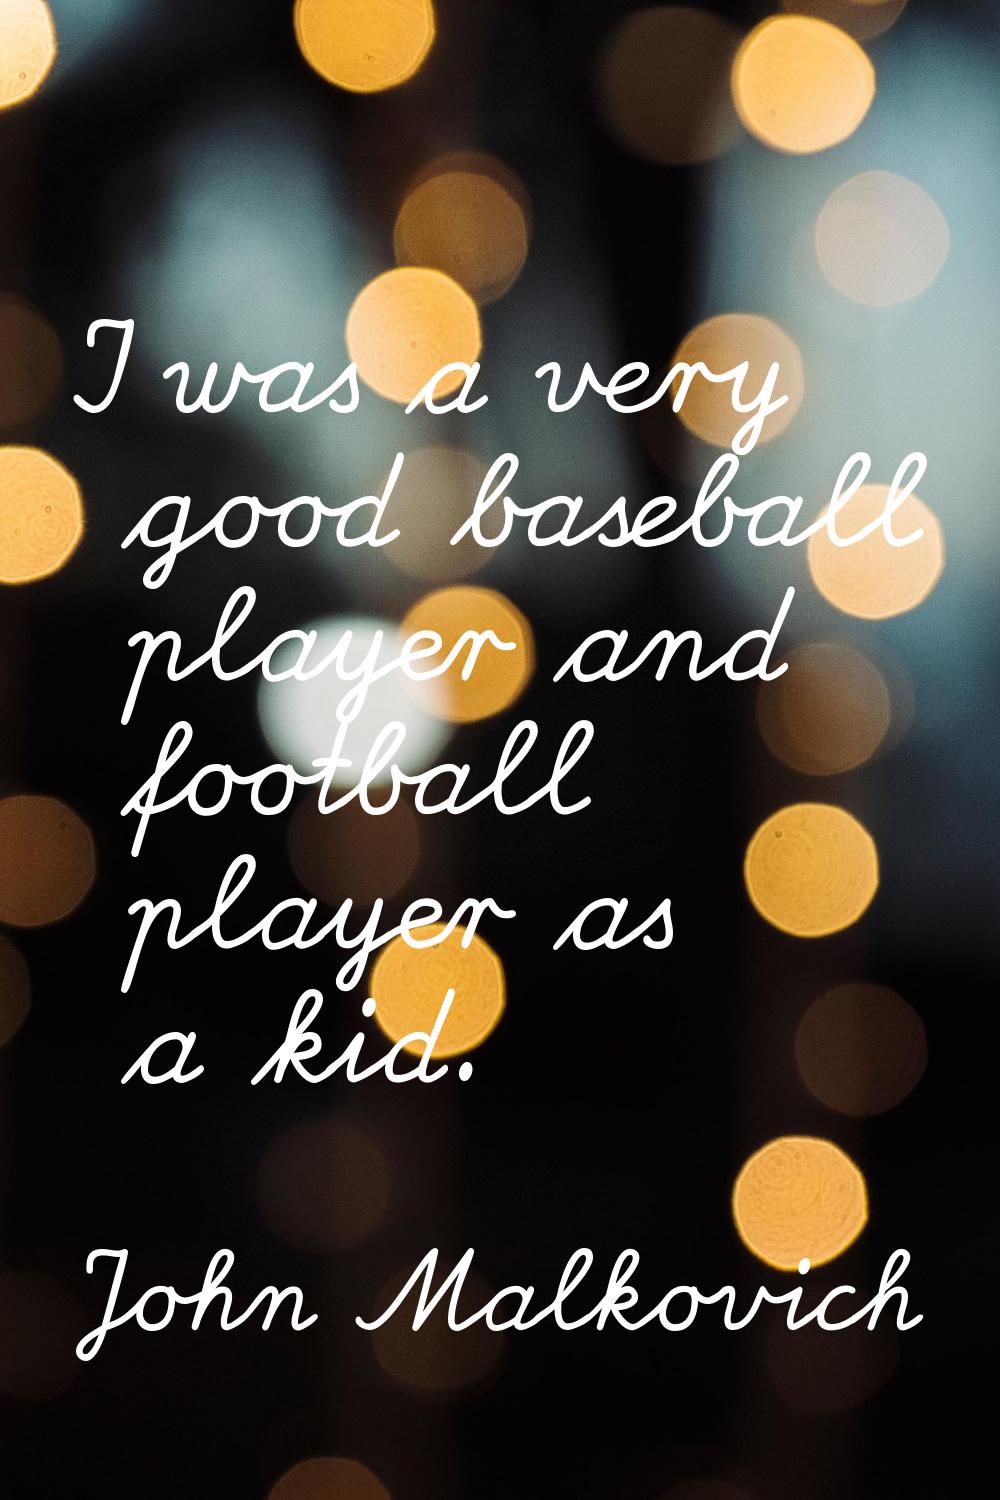 I was a very good baseball player and football player as a kid.